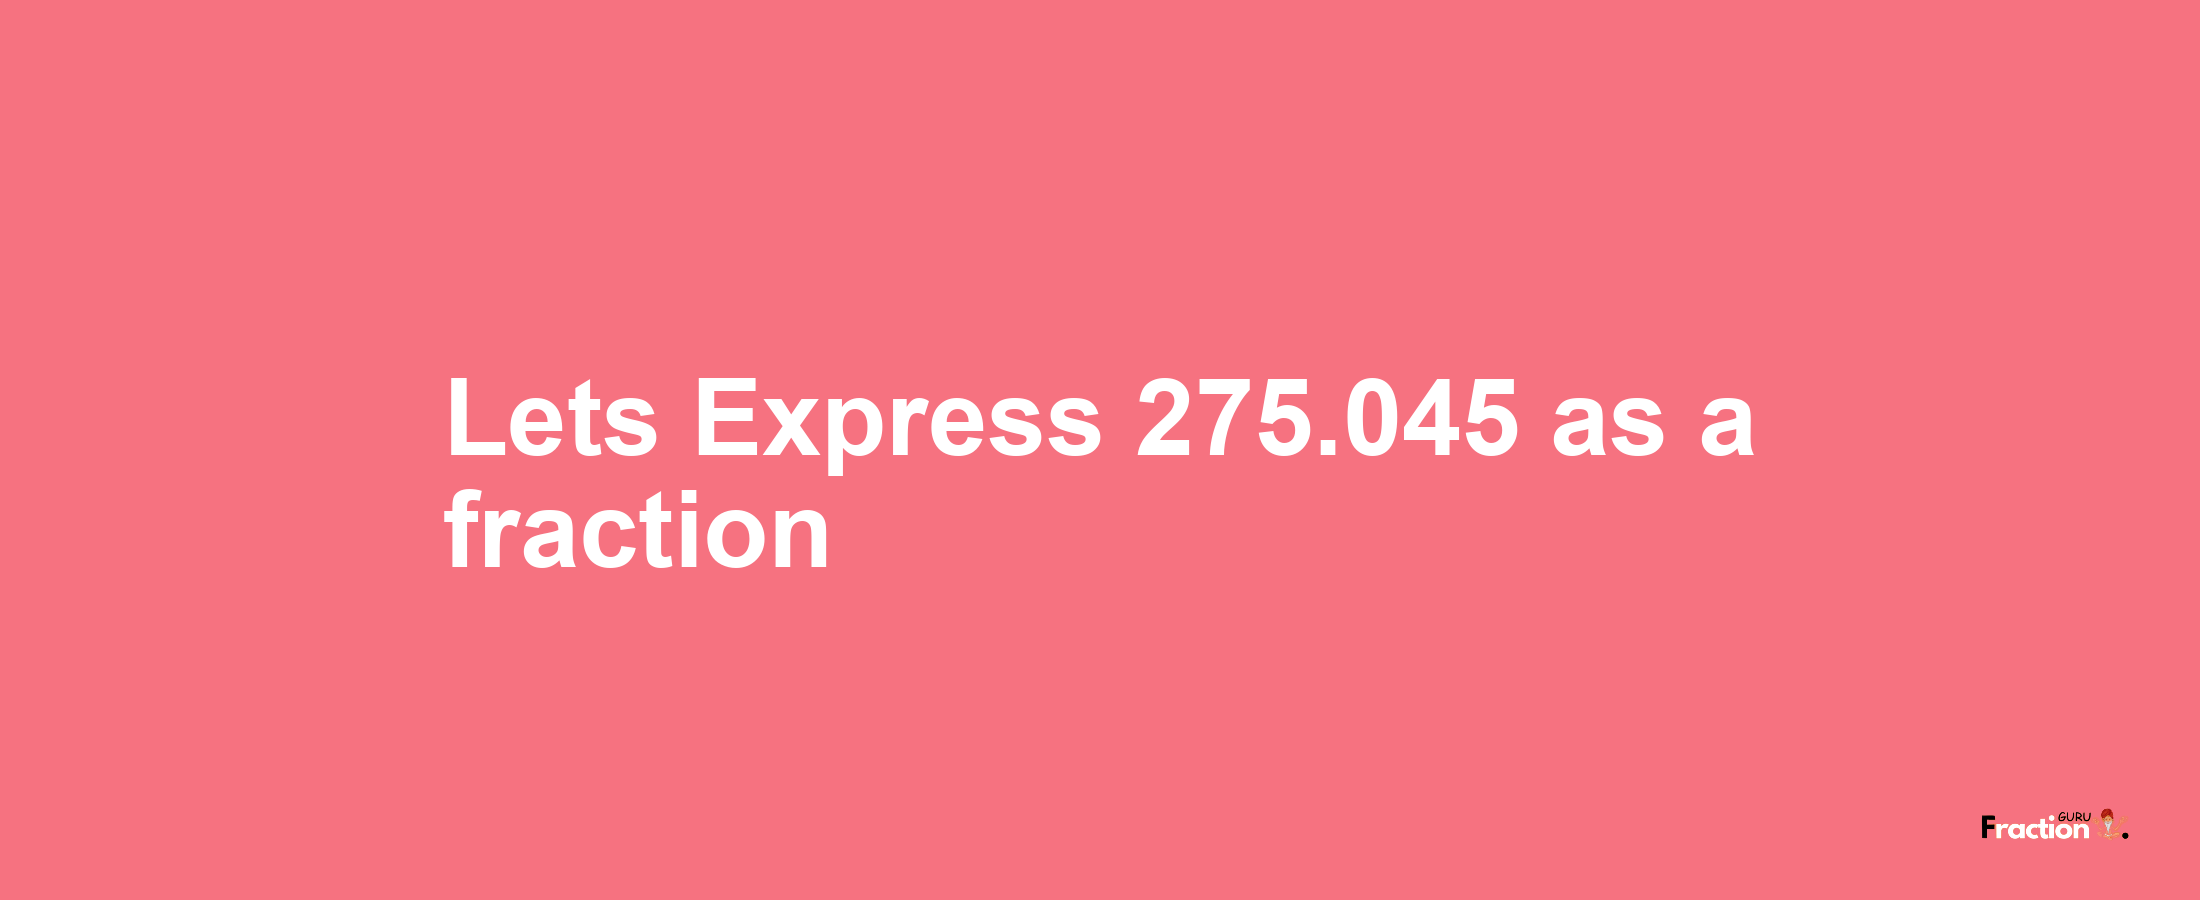 Lets Express 275.045 as afraction